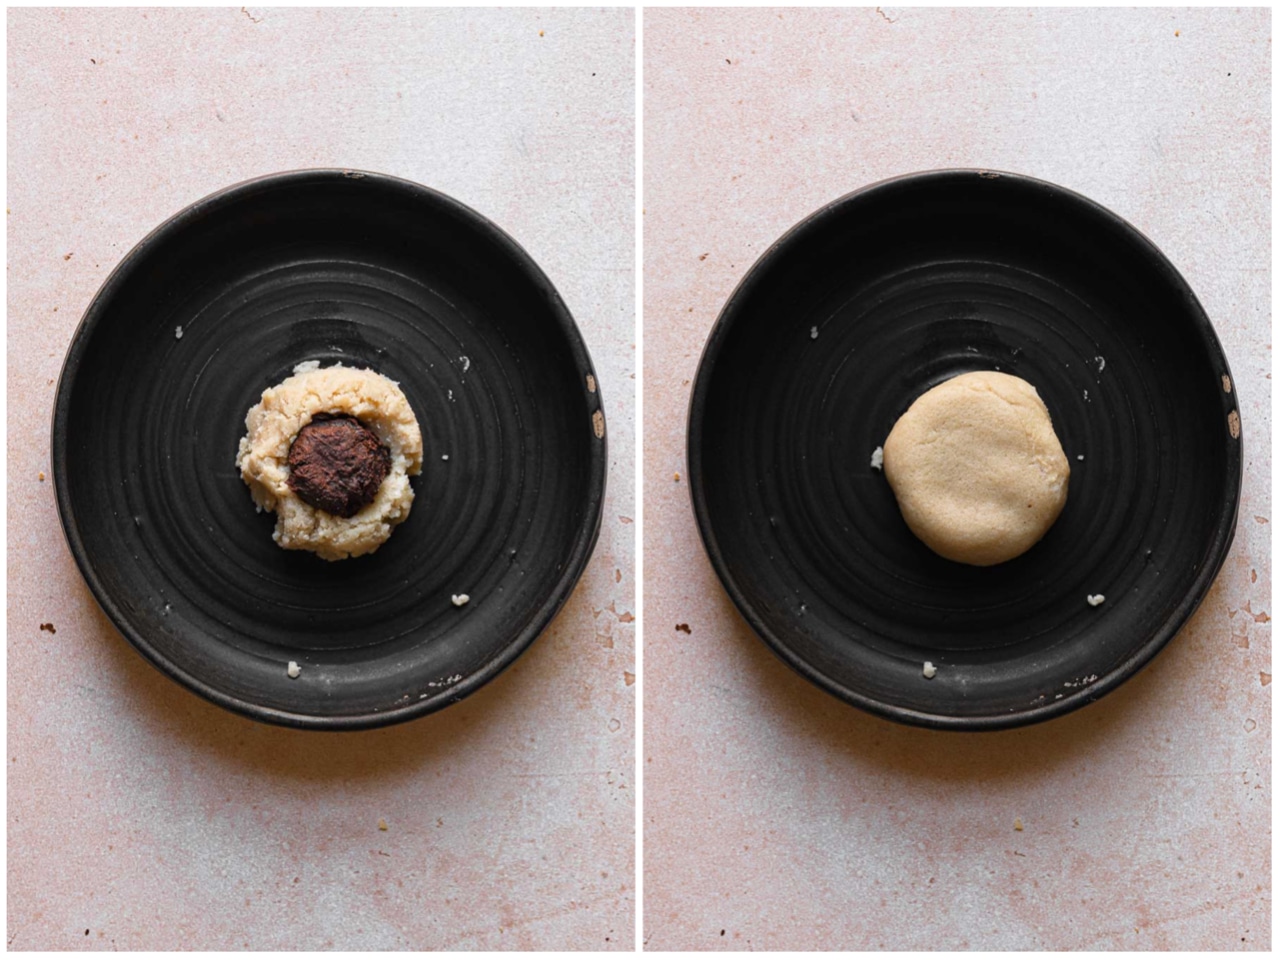 A side-by-side photo shows a scoop of chocolate ganache resting in the cookie dough, and then the cookie dough covering the chocolate ganache completely. 